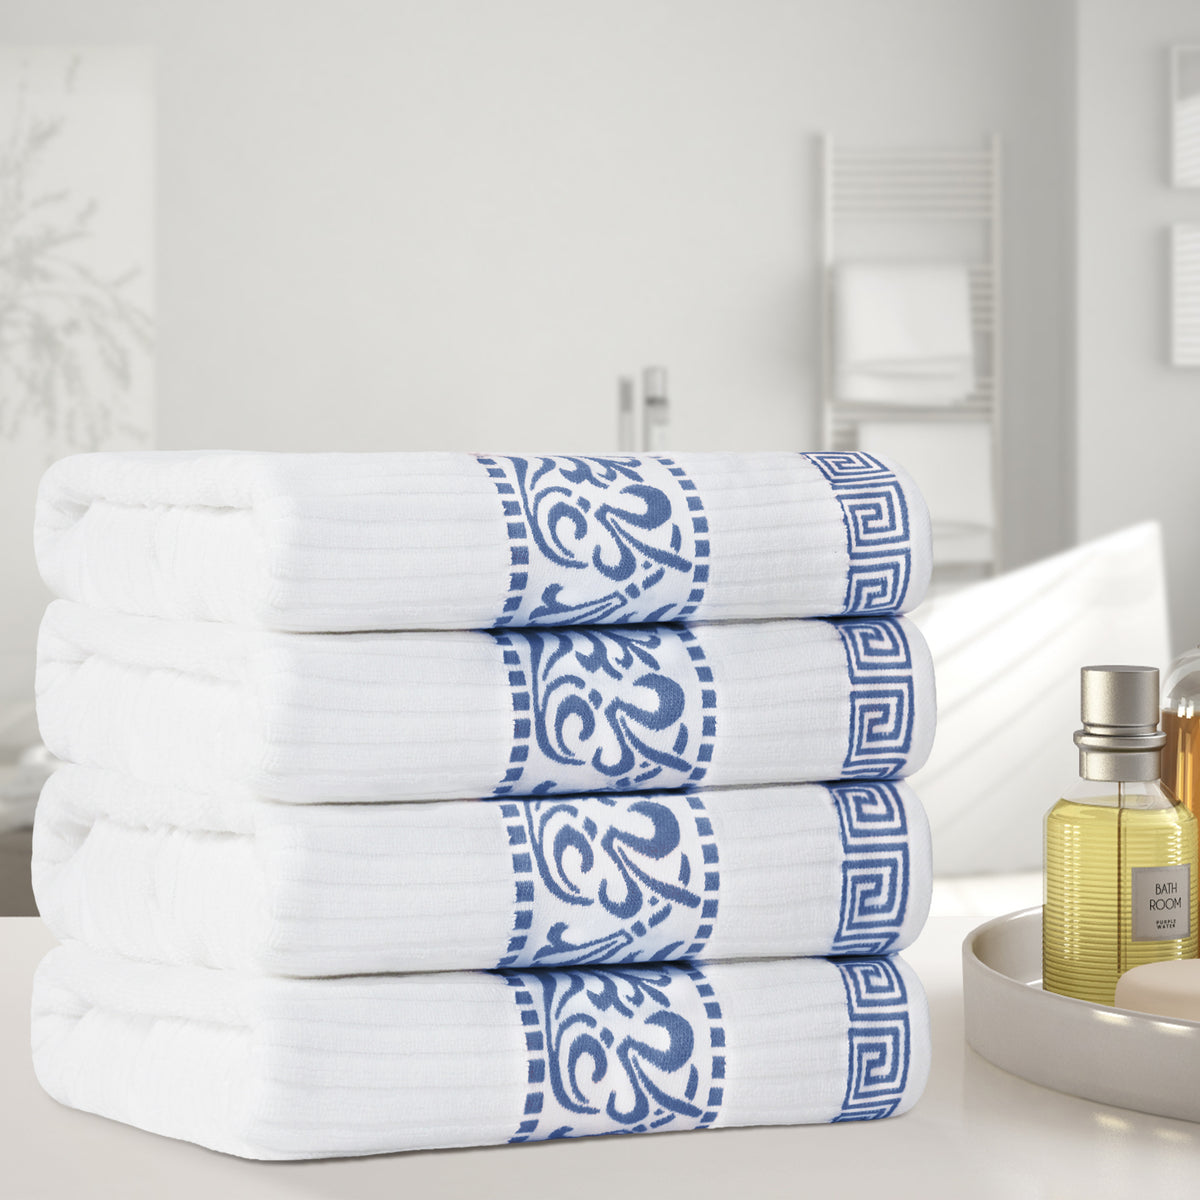 Superior Athens Cotton 4-Piece Bath Towel Set with Greek Scroll and Floral Pattern - Navy BlueSuperior Athens Cotton 4-Piece Bath Towel Set with Greek Scroll and Floral Pattern - Navy Blue